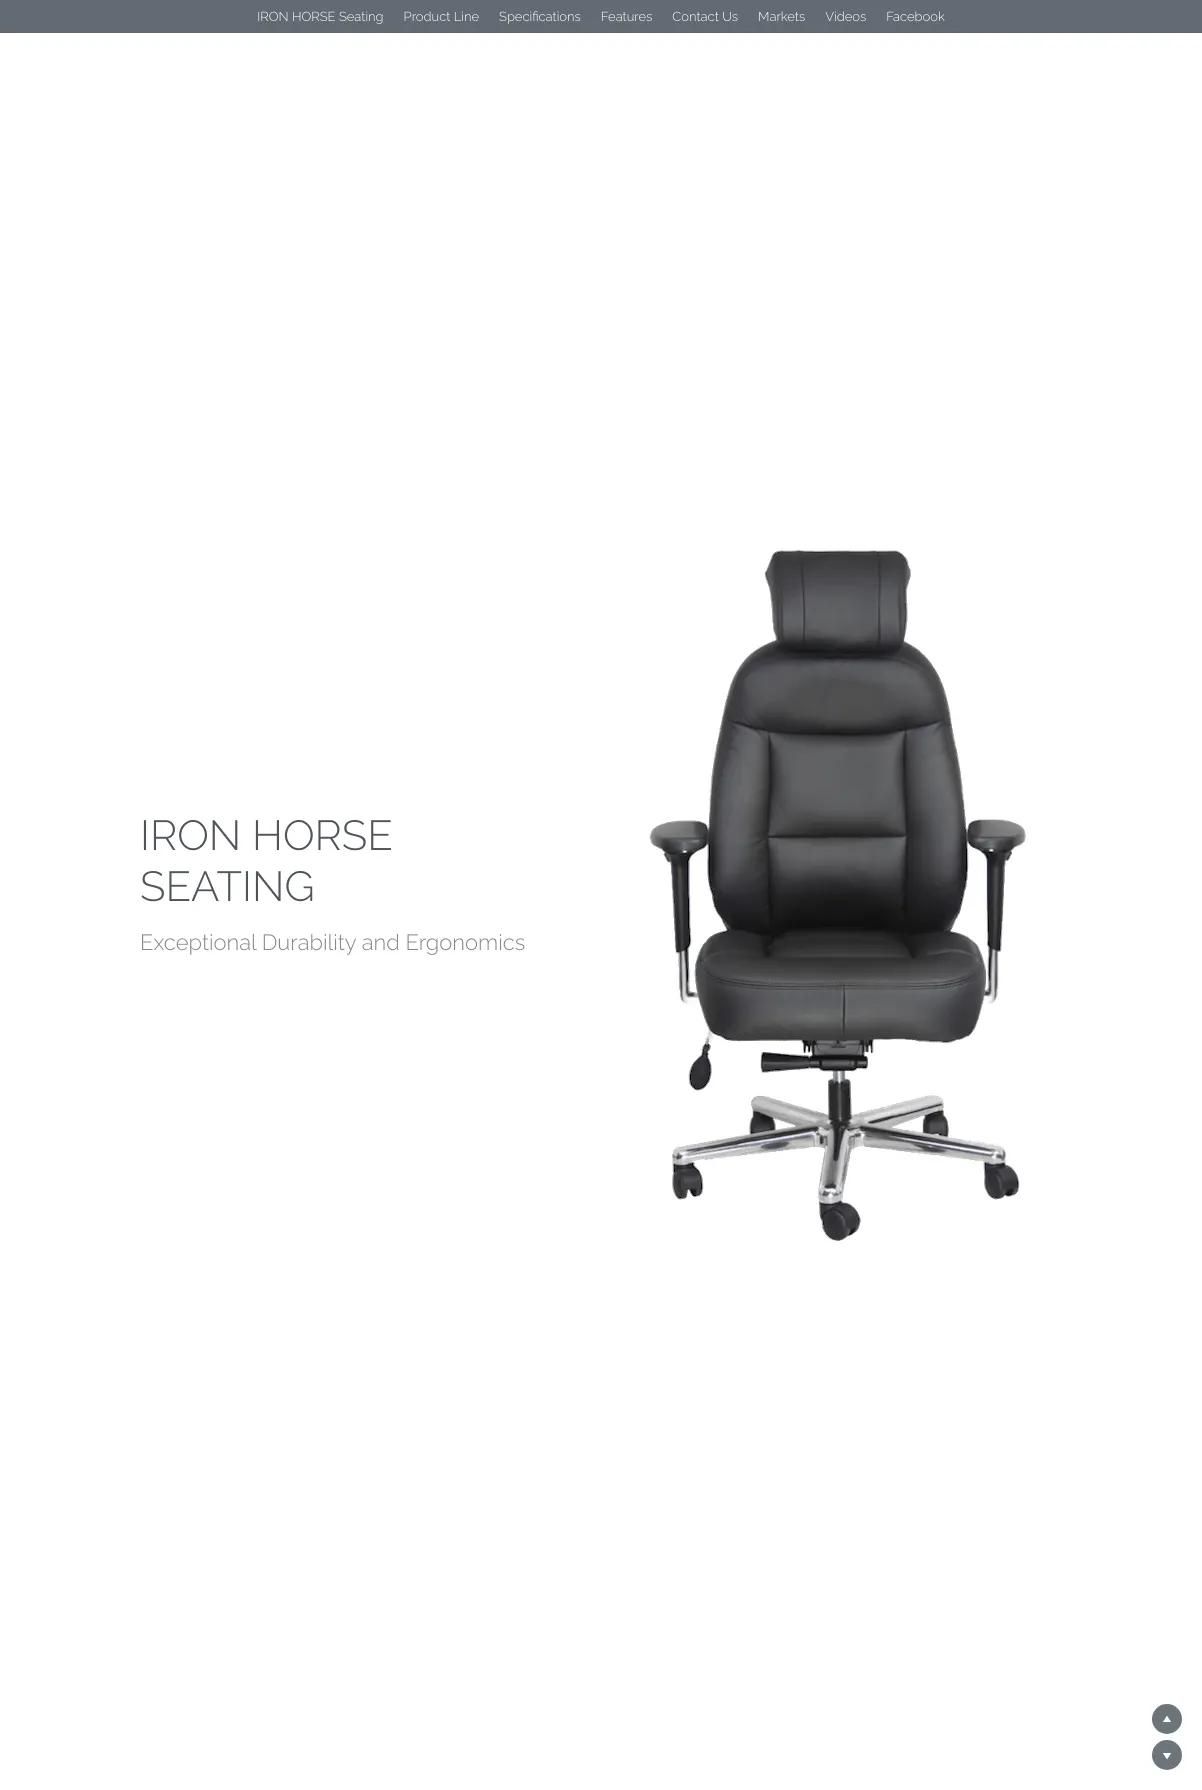 Screenshot 2 of Apex Office Chairs (Example Strikingly Website)